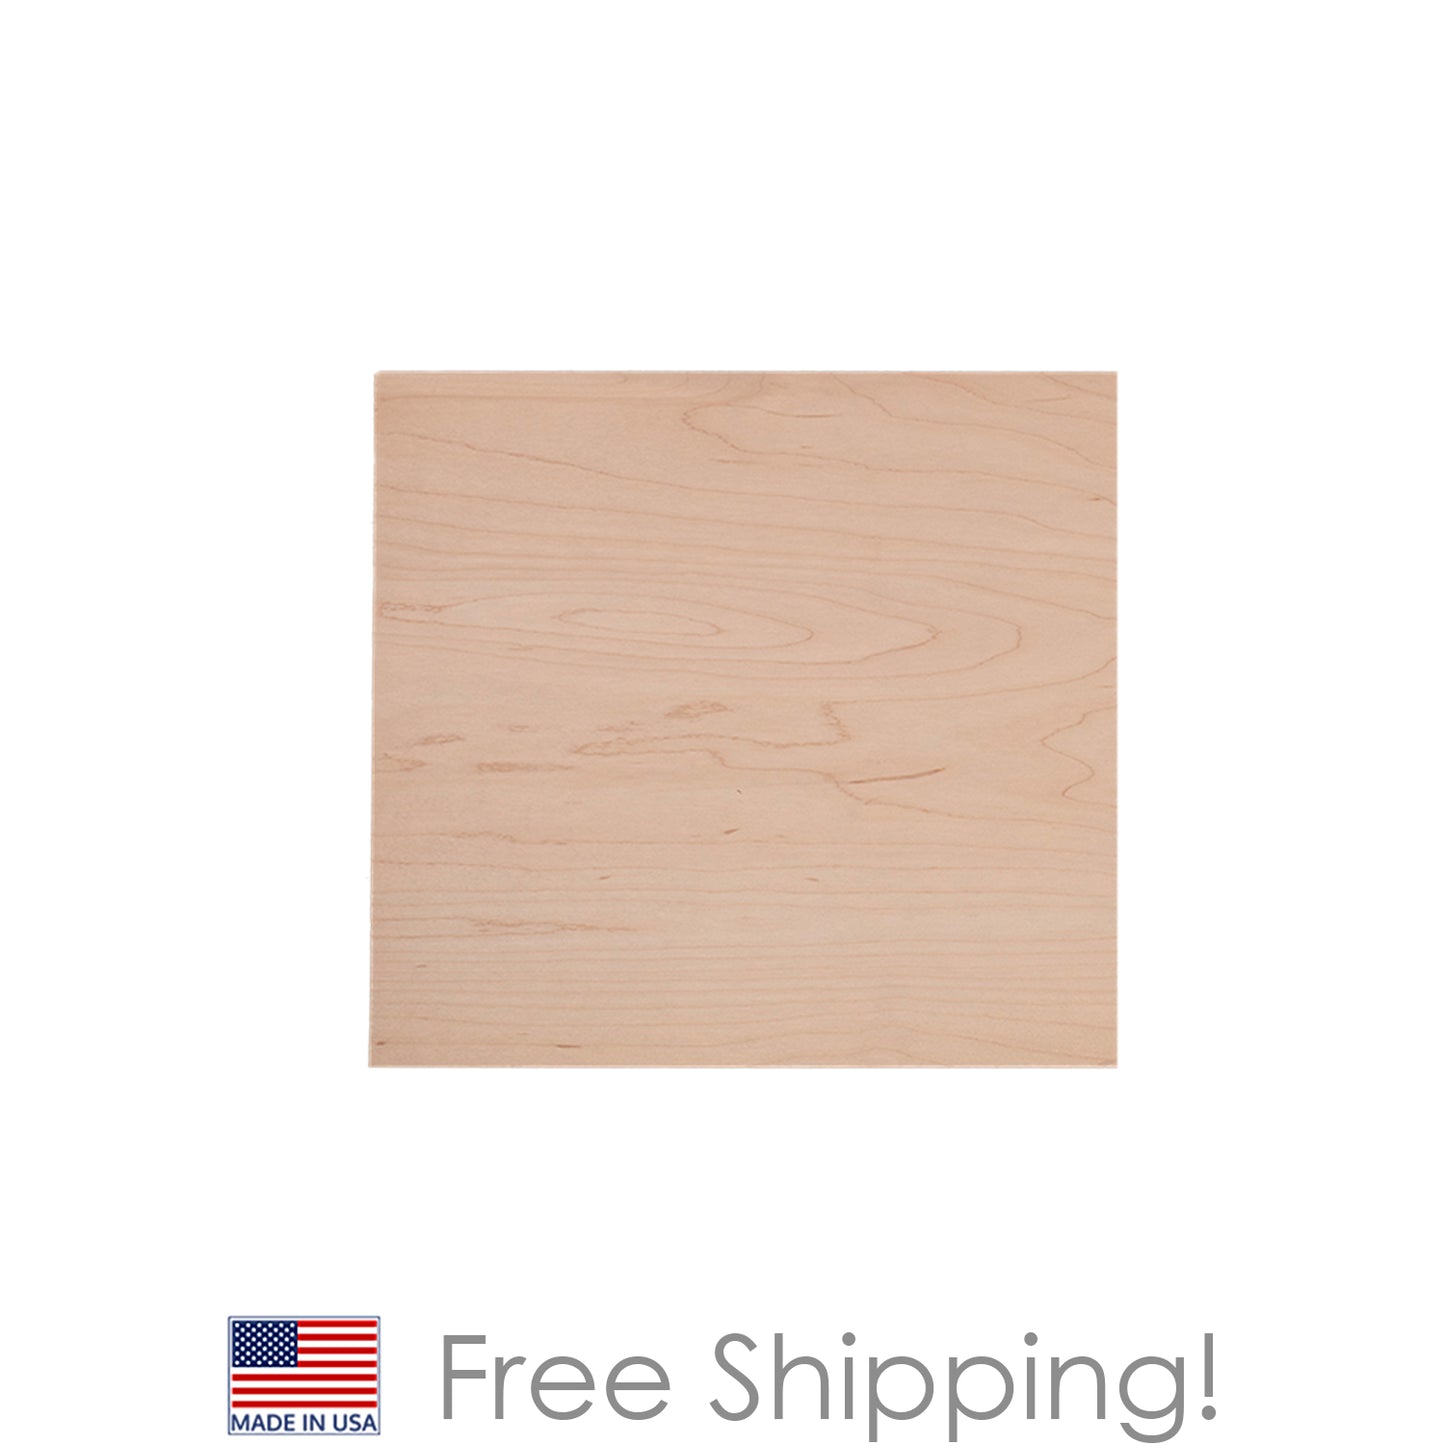 Quicklock RTA (Ready-to-Assemble) Raw Maple .25"X11.25"X12" End Panel